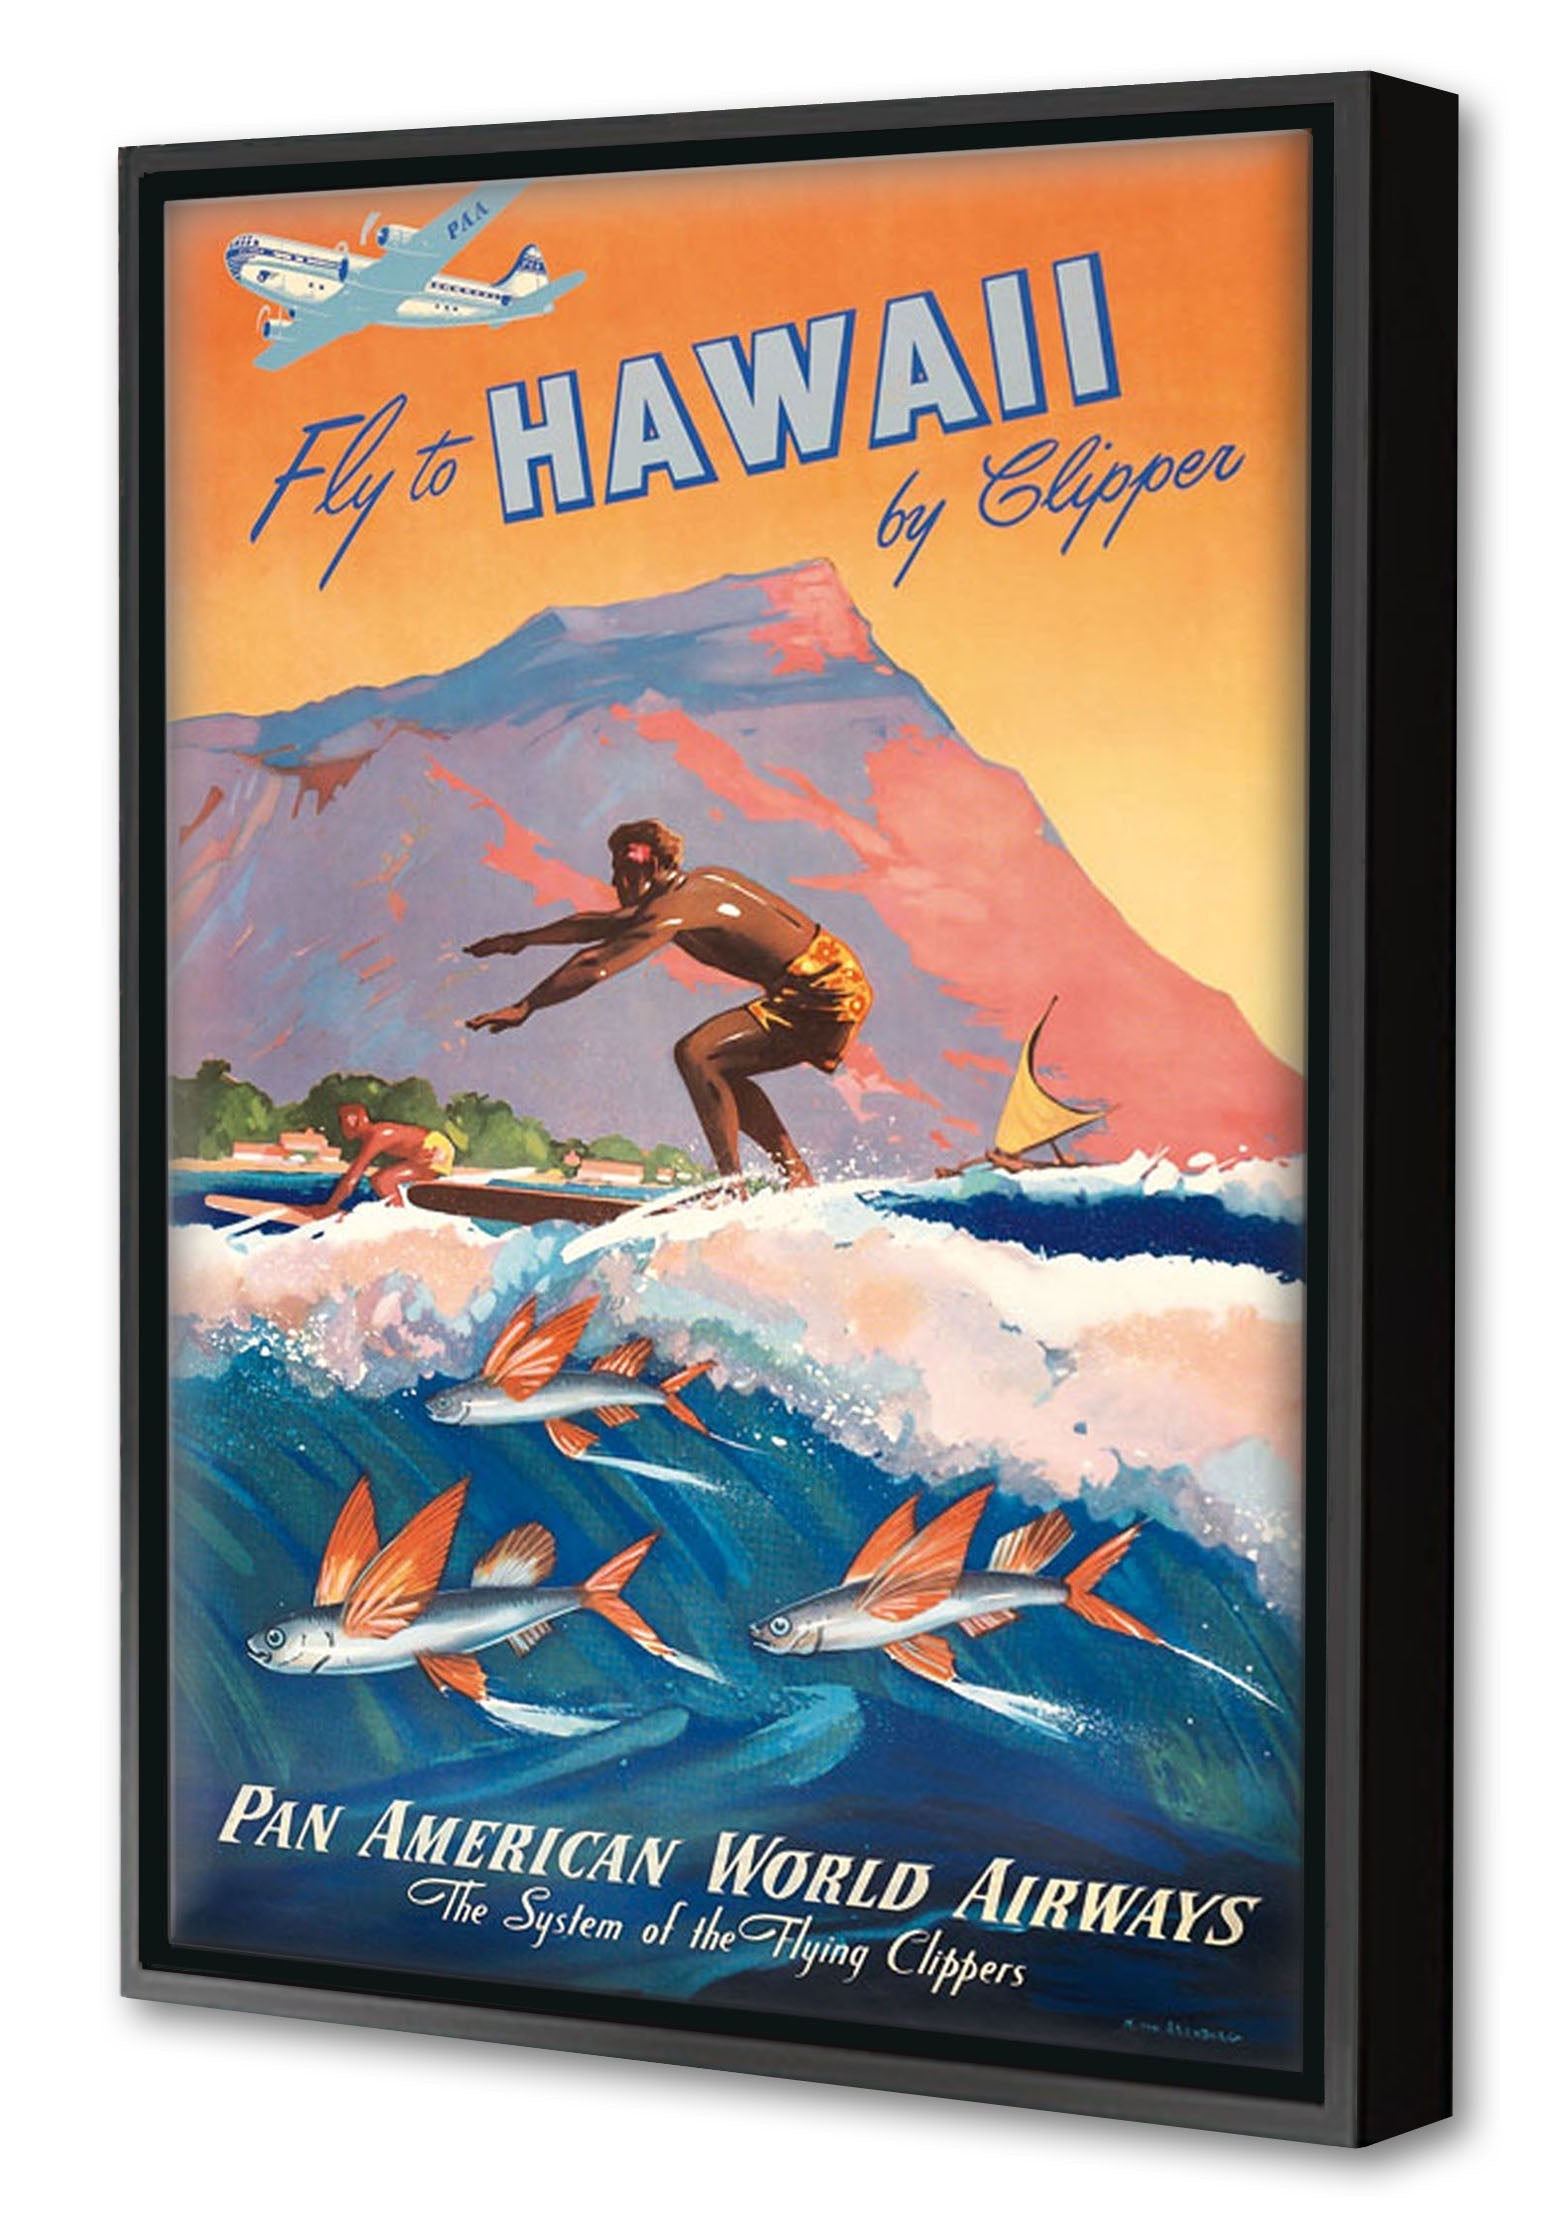 Hawai-airlines, print-Canvas Print with Box Frame-40 x 60 cm-BLUE SHAKER